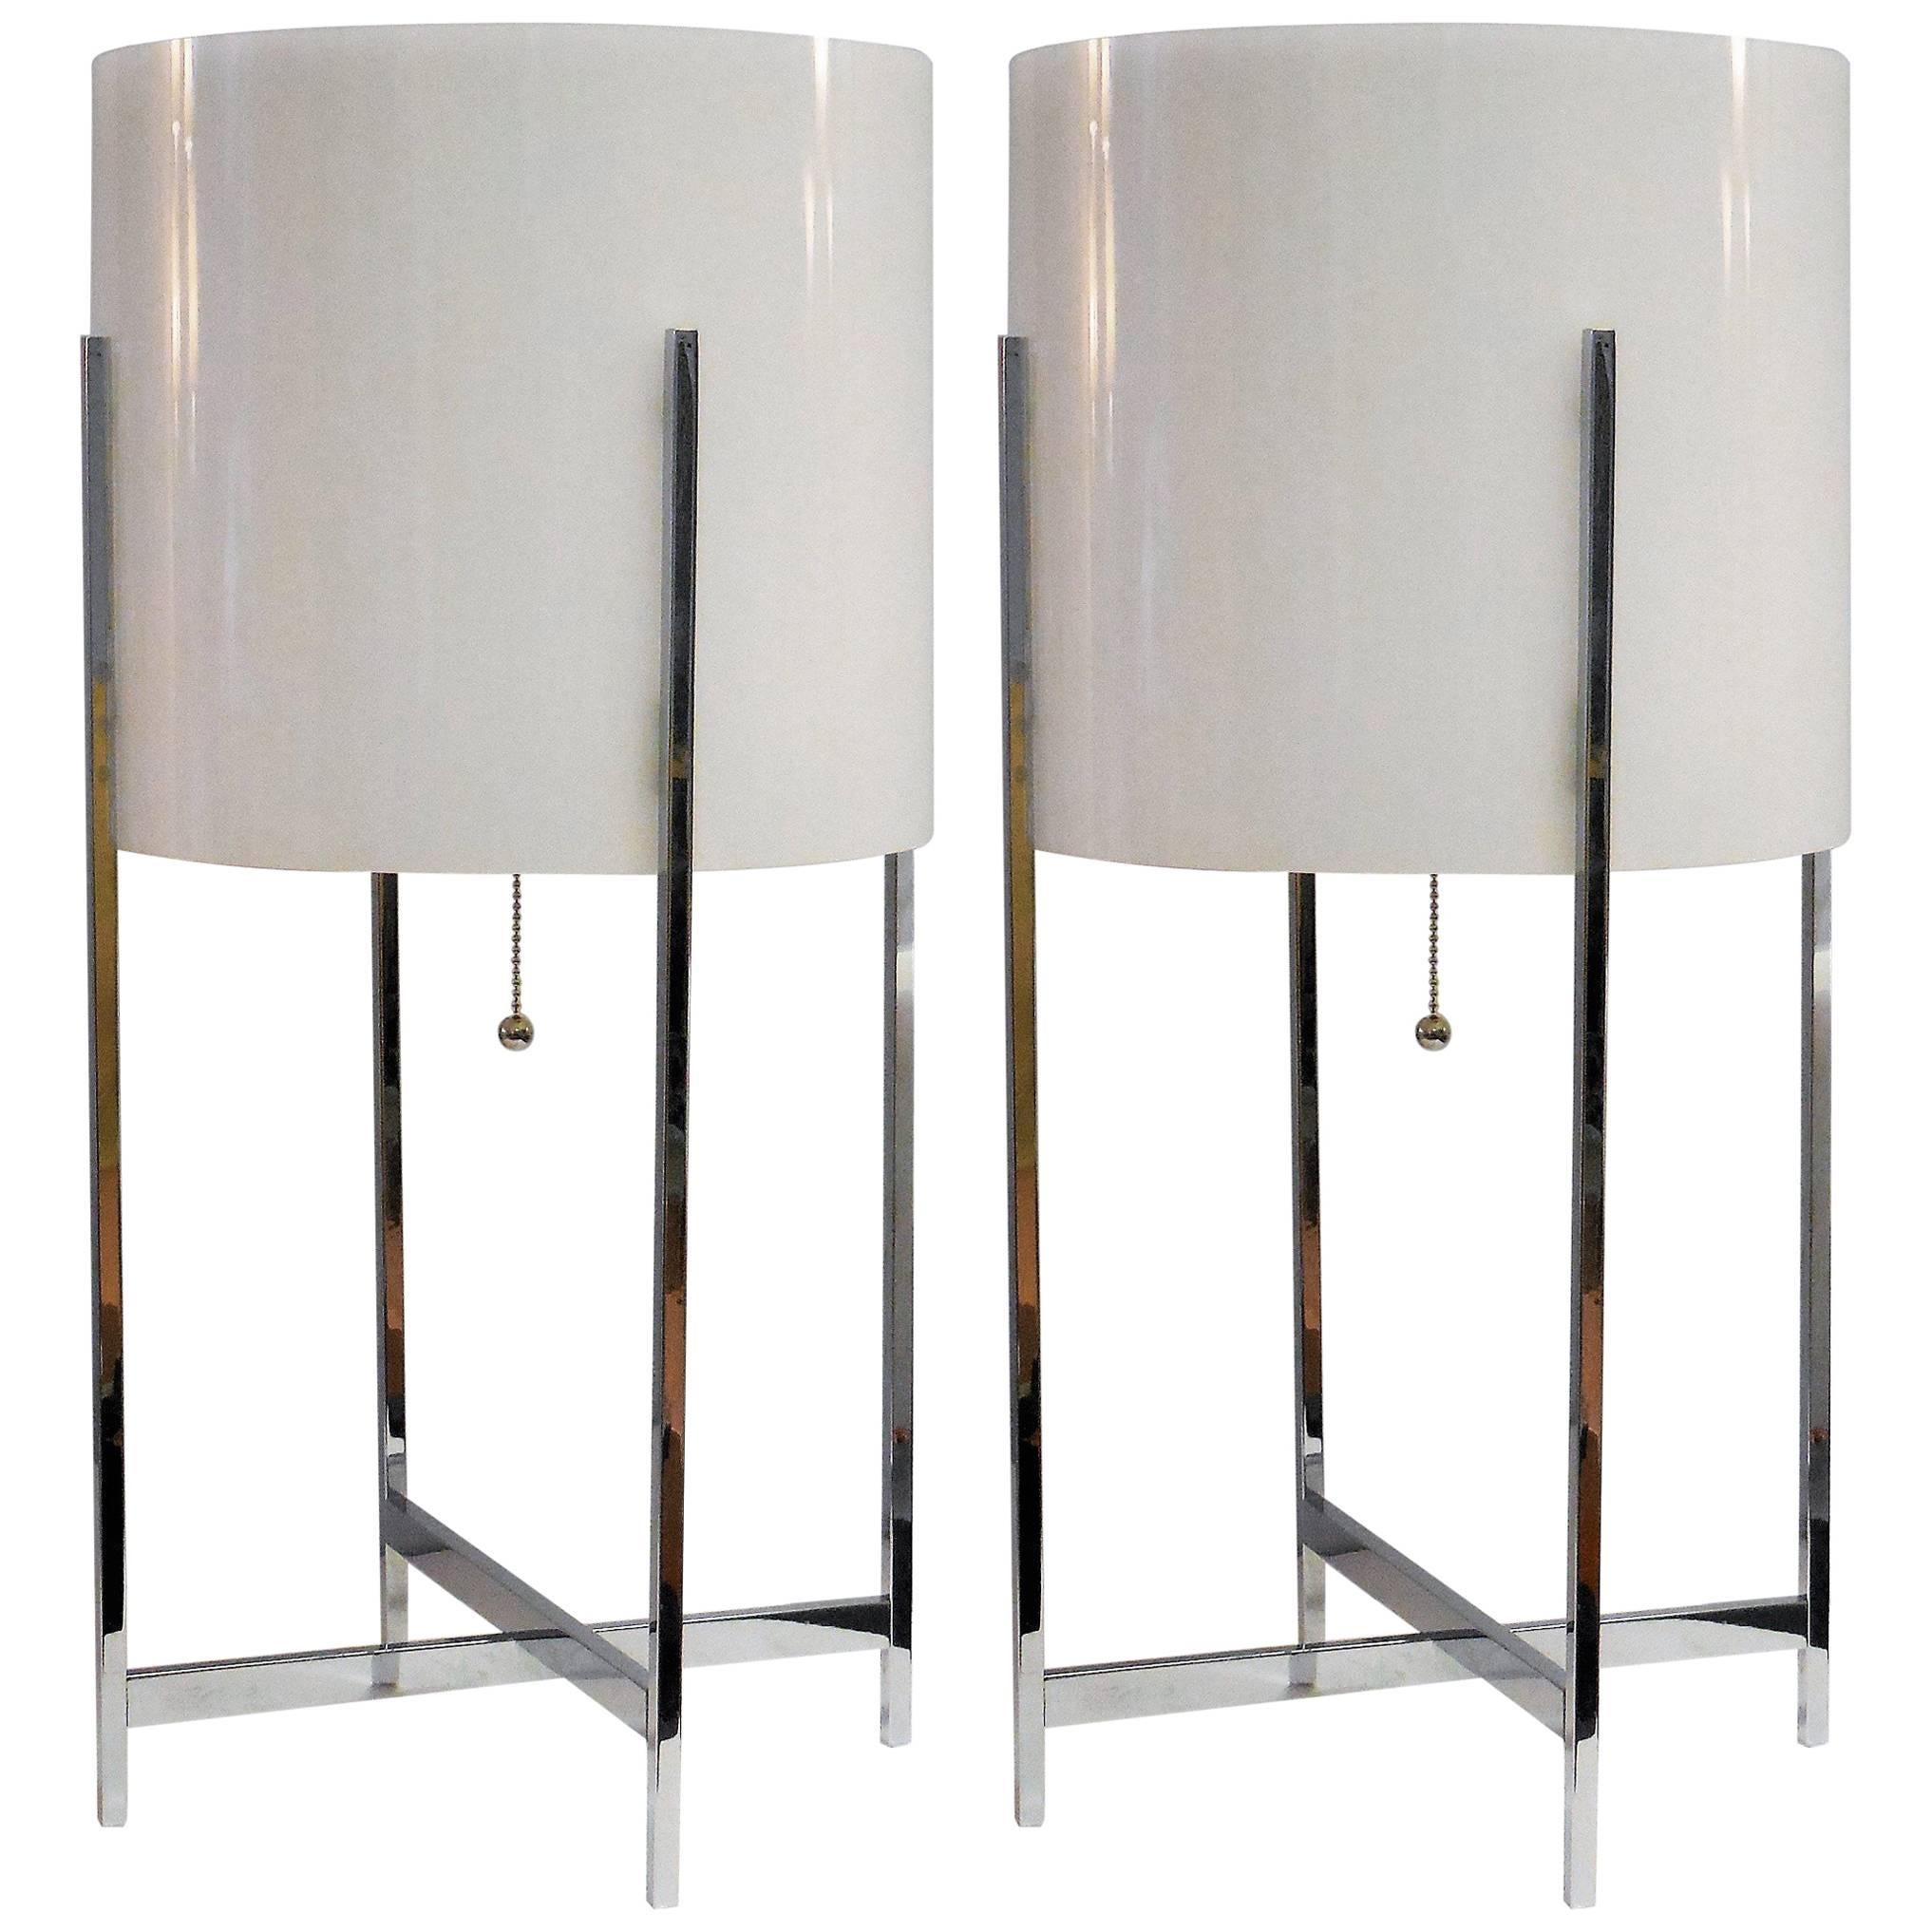 Pair of Paul Mayen for Habitat Chrome and Lucite Table Lamps, 1970s